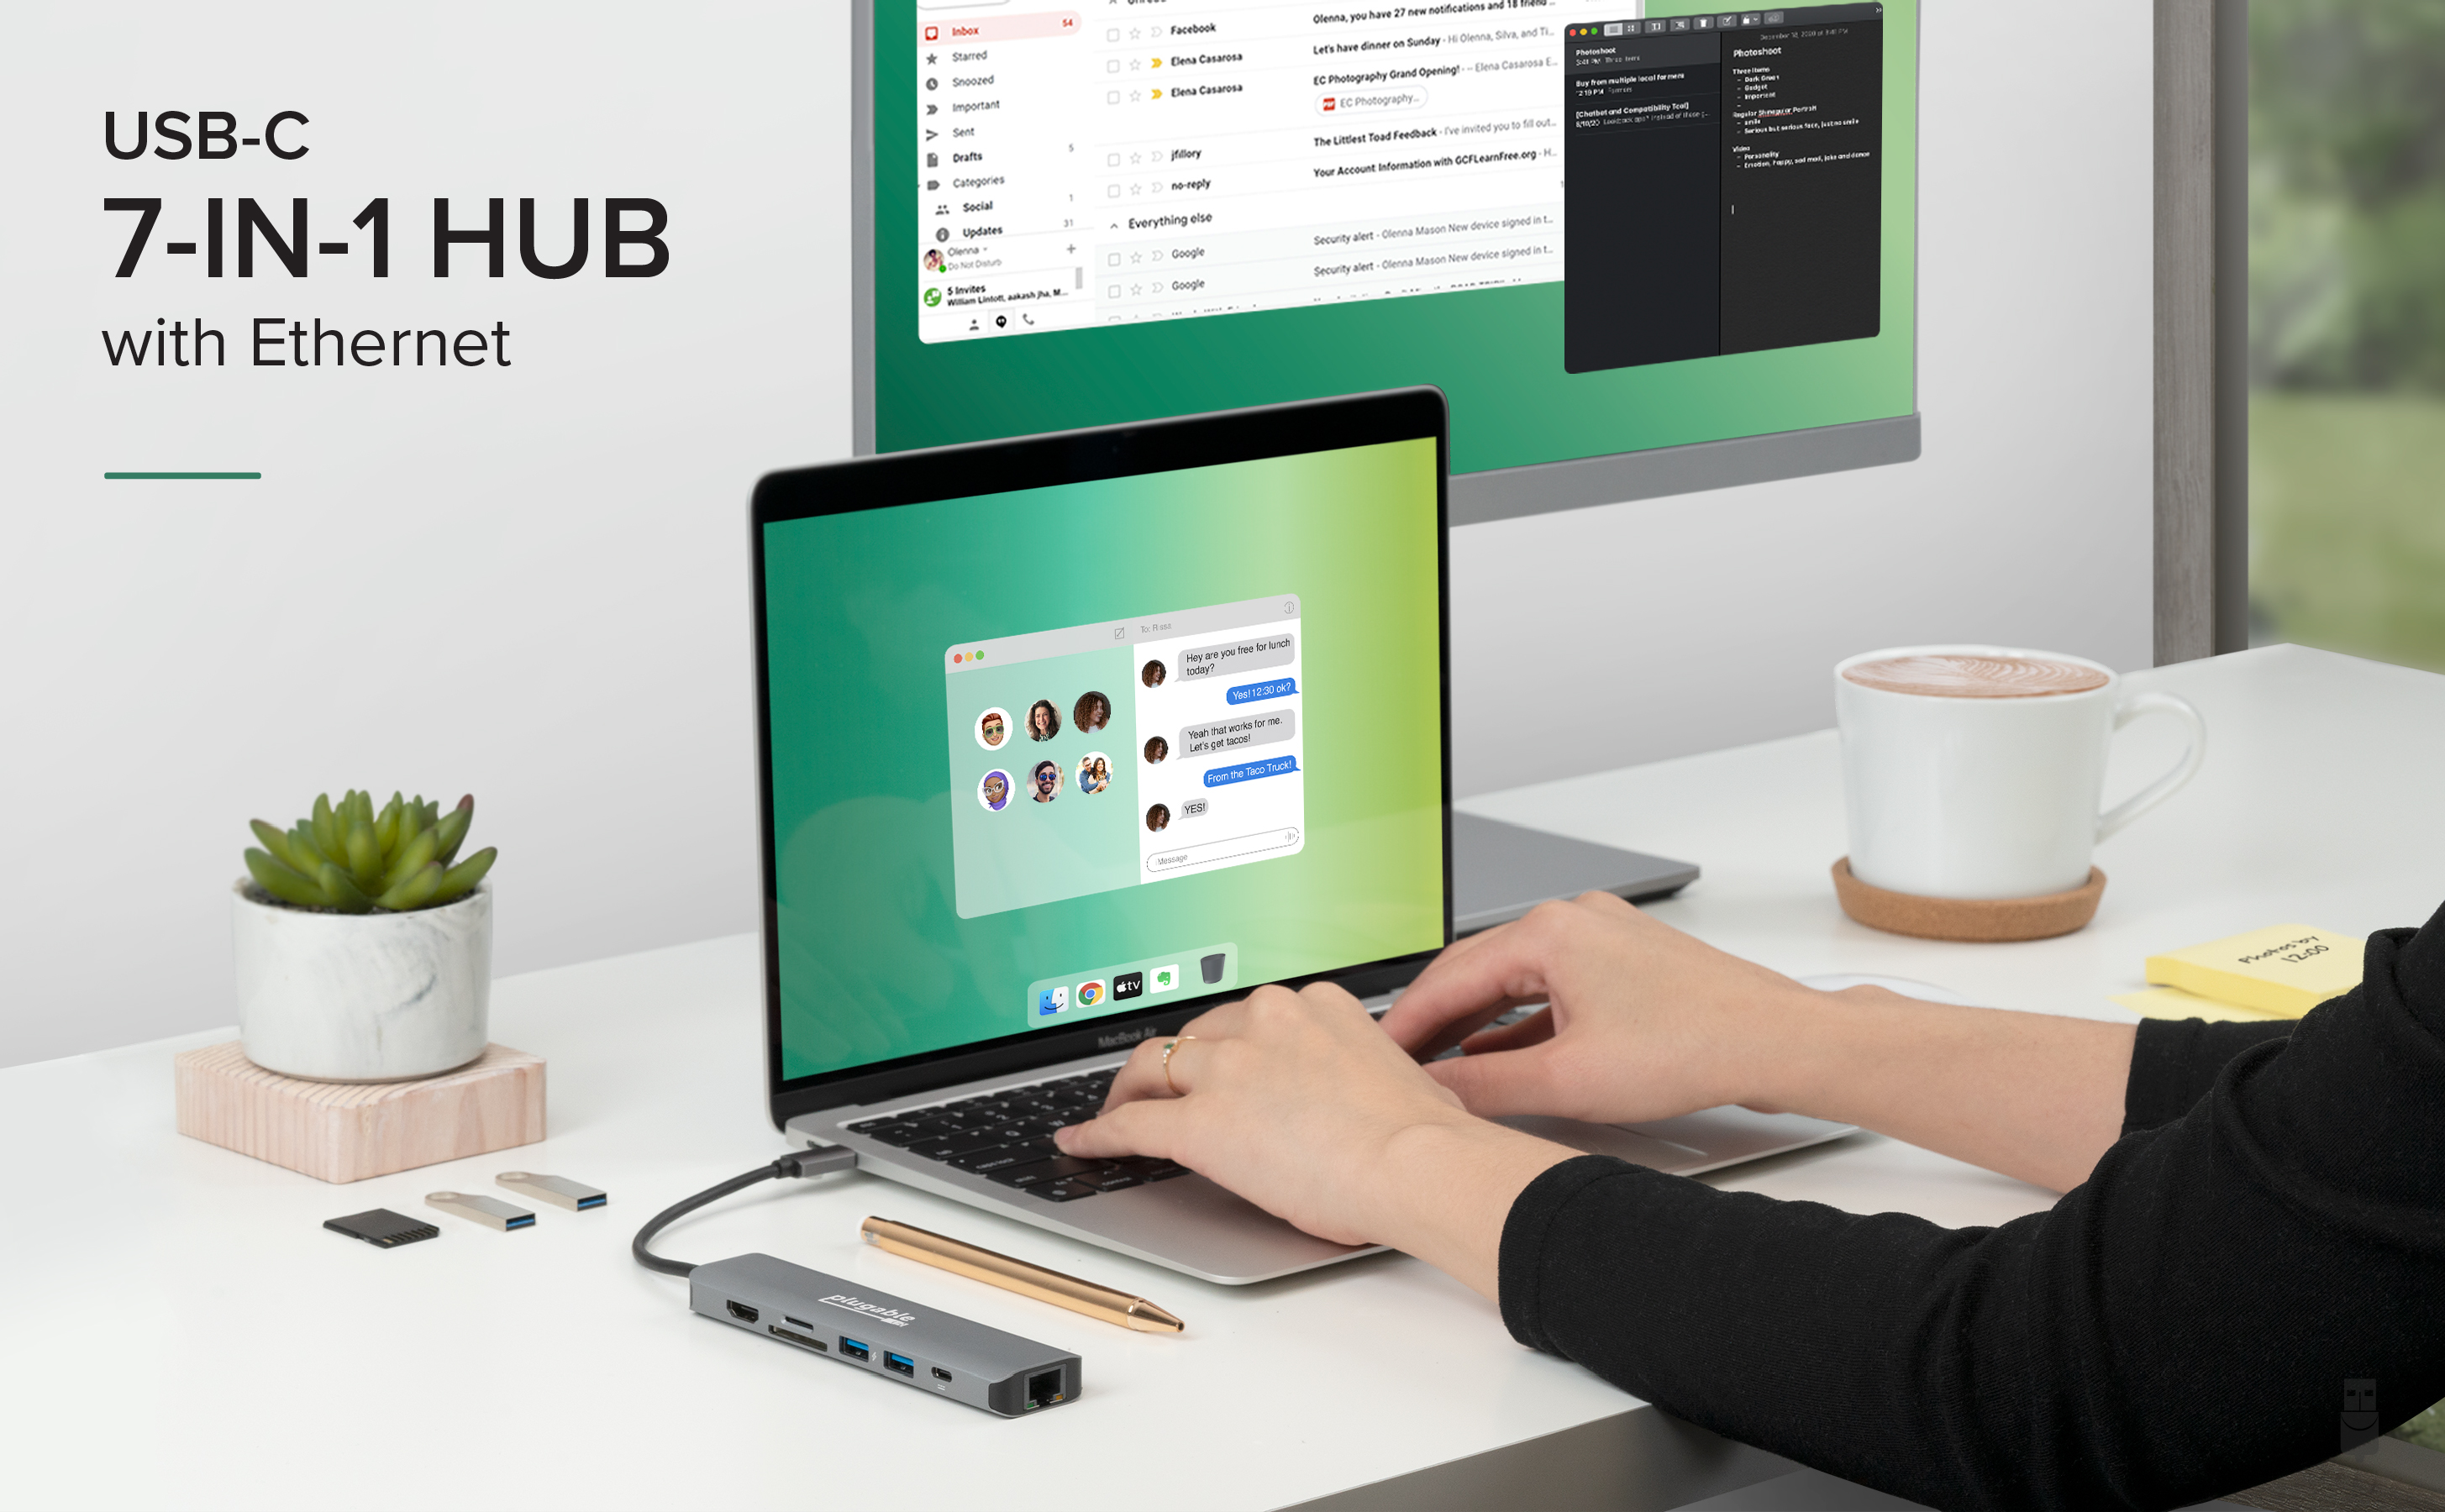 USB-C 7-in-1 Hub with Ethernet